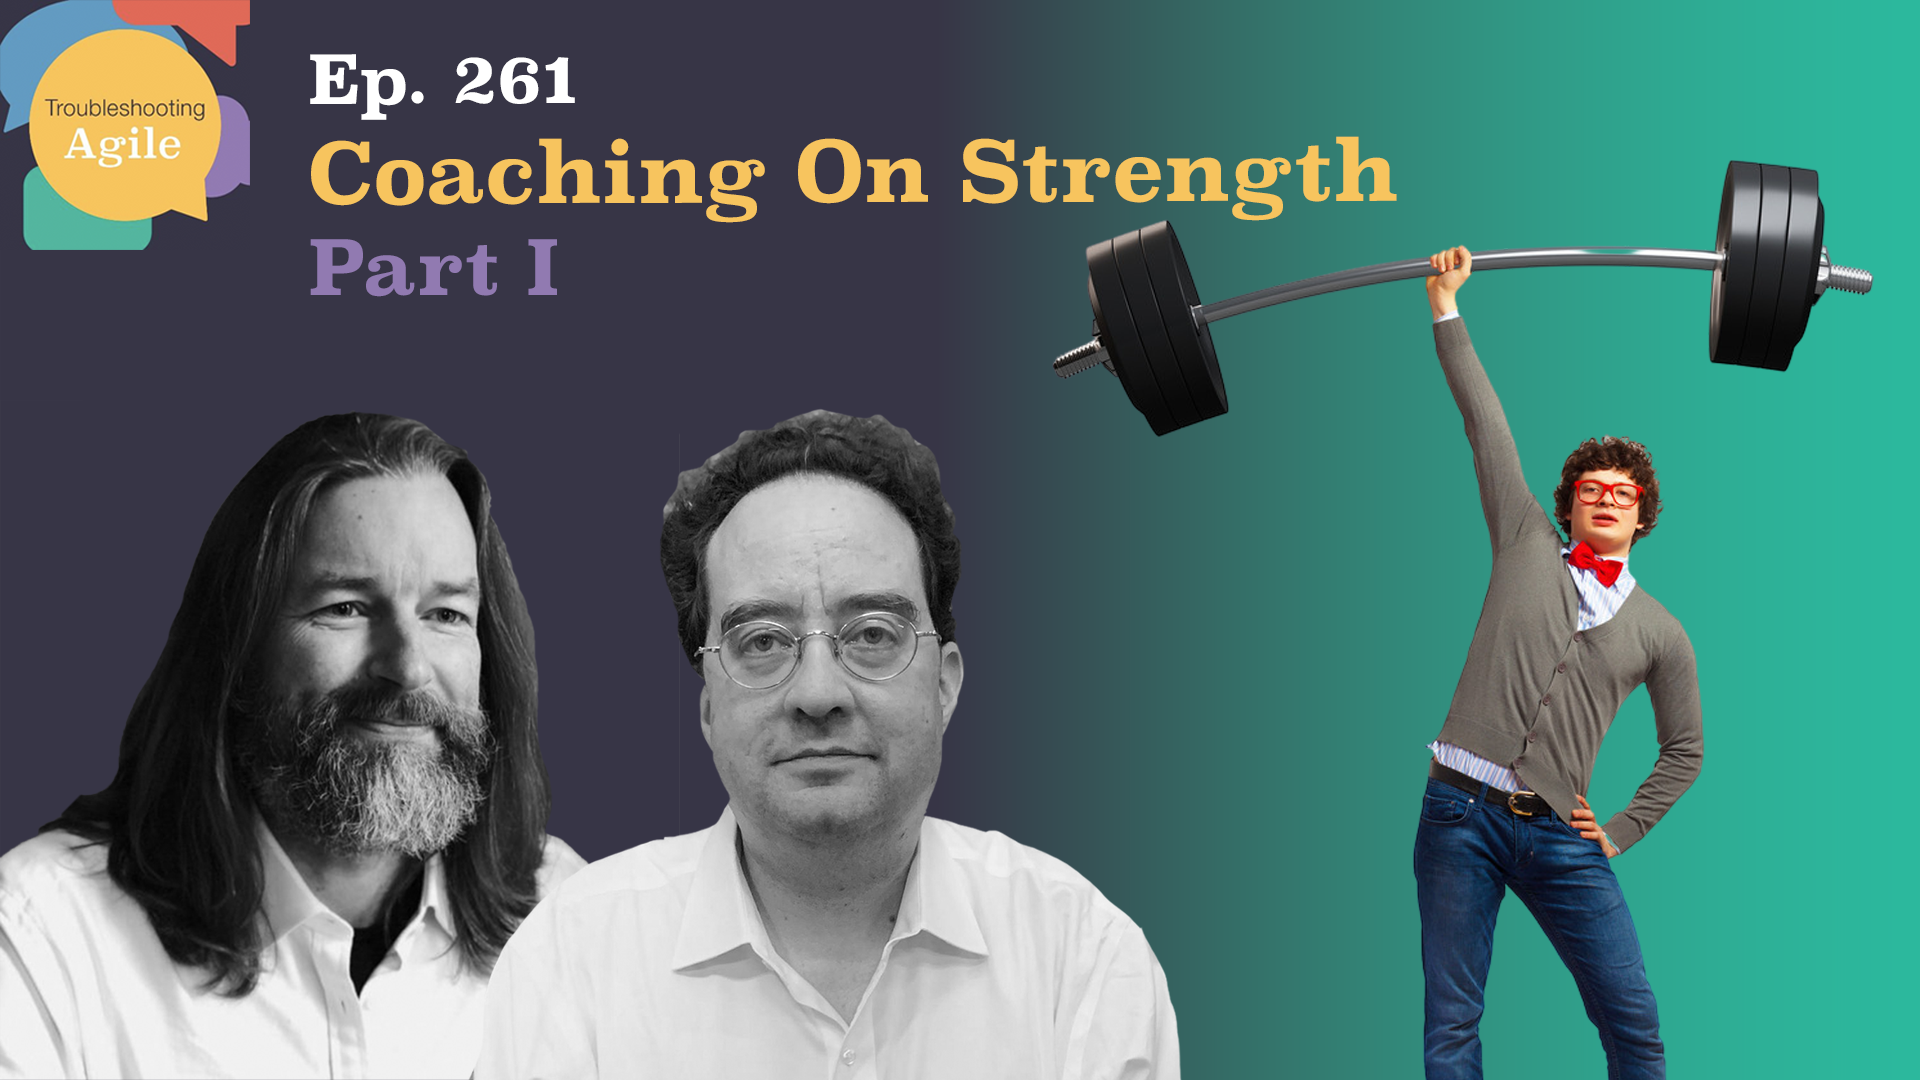 Coaching on Strength, Part 1